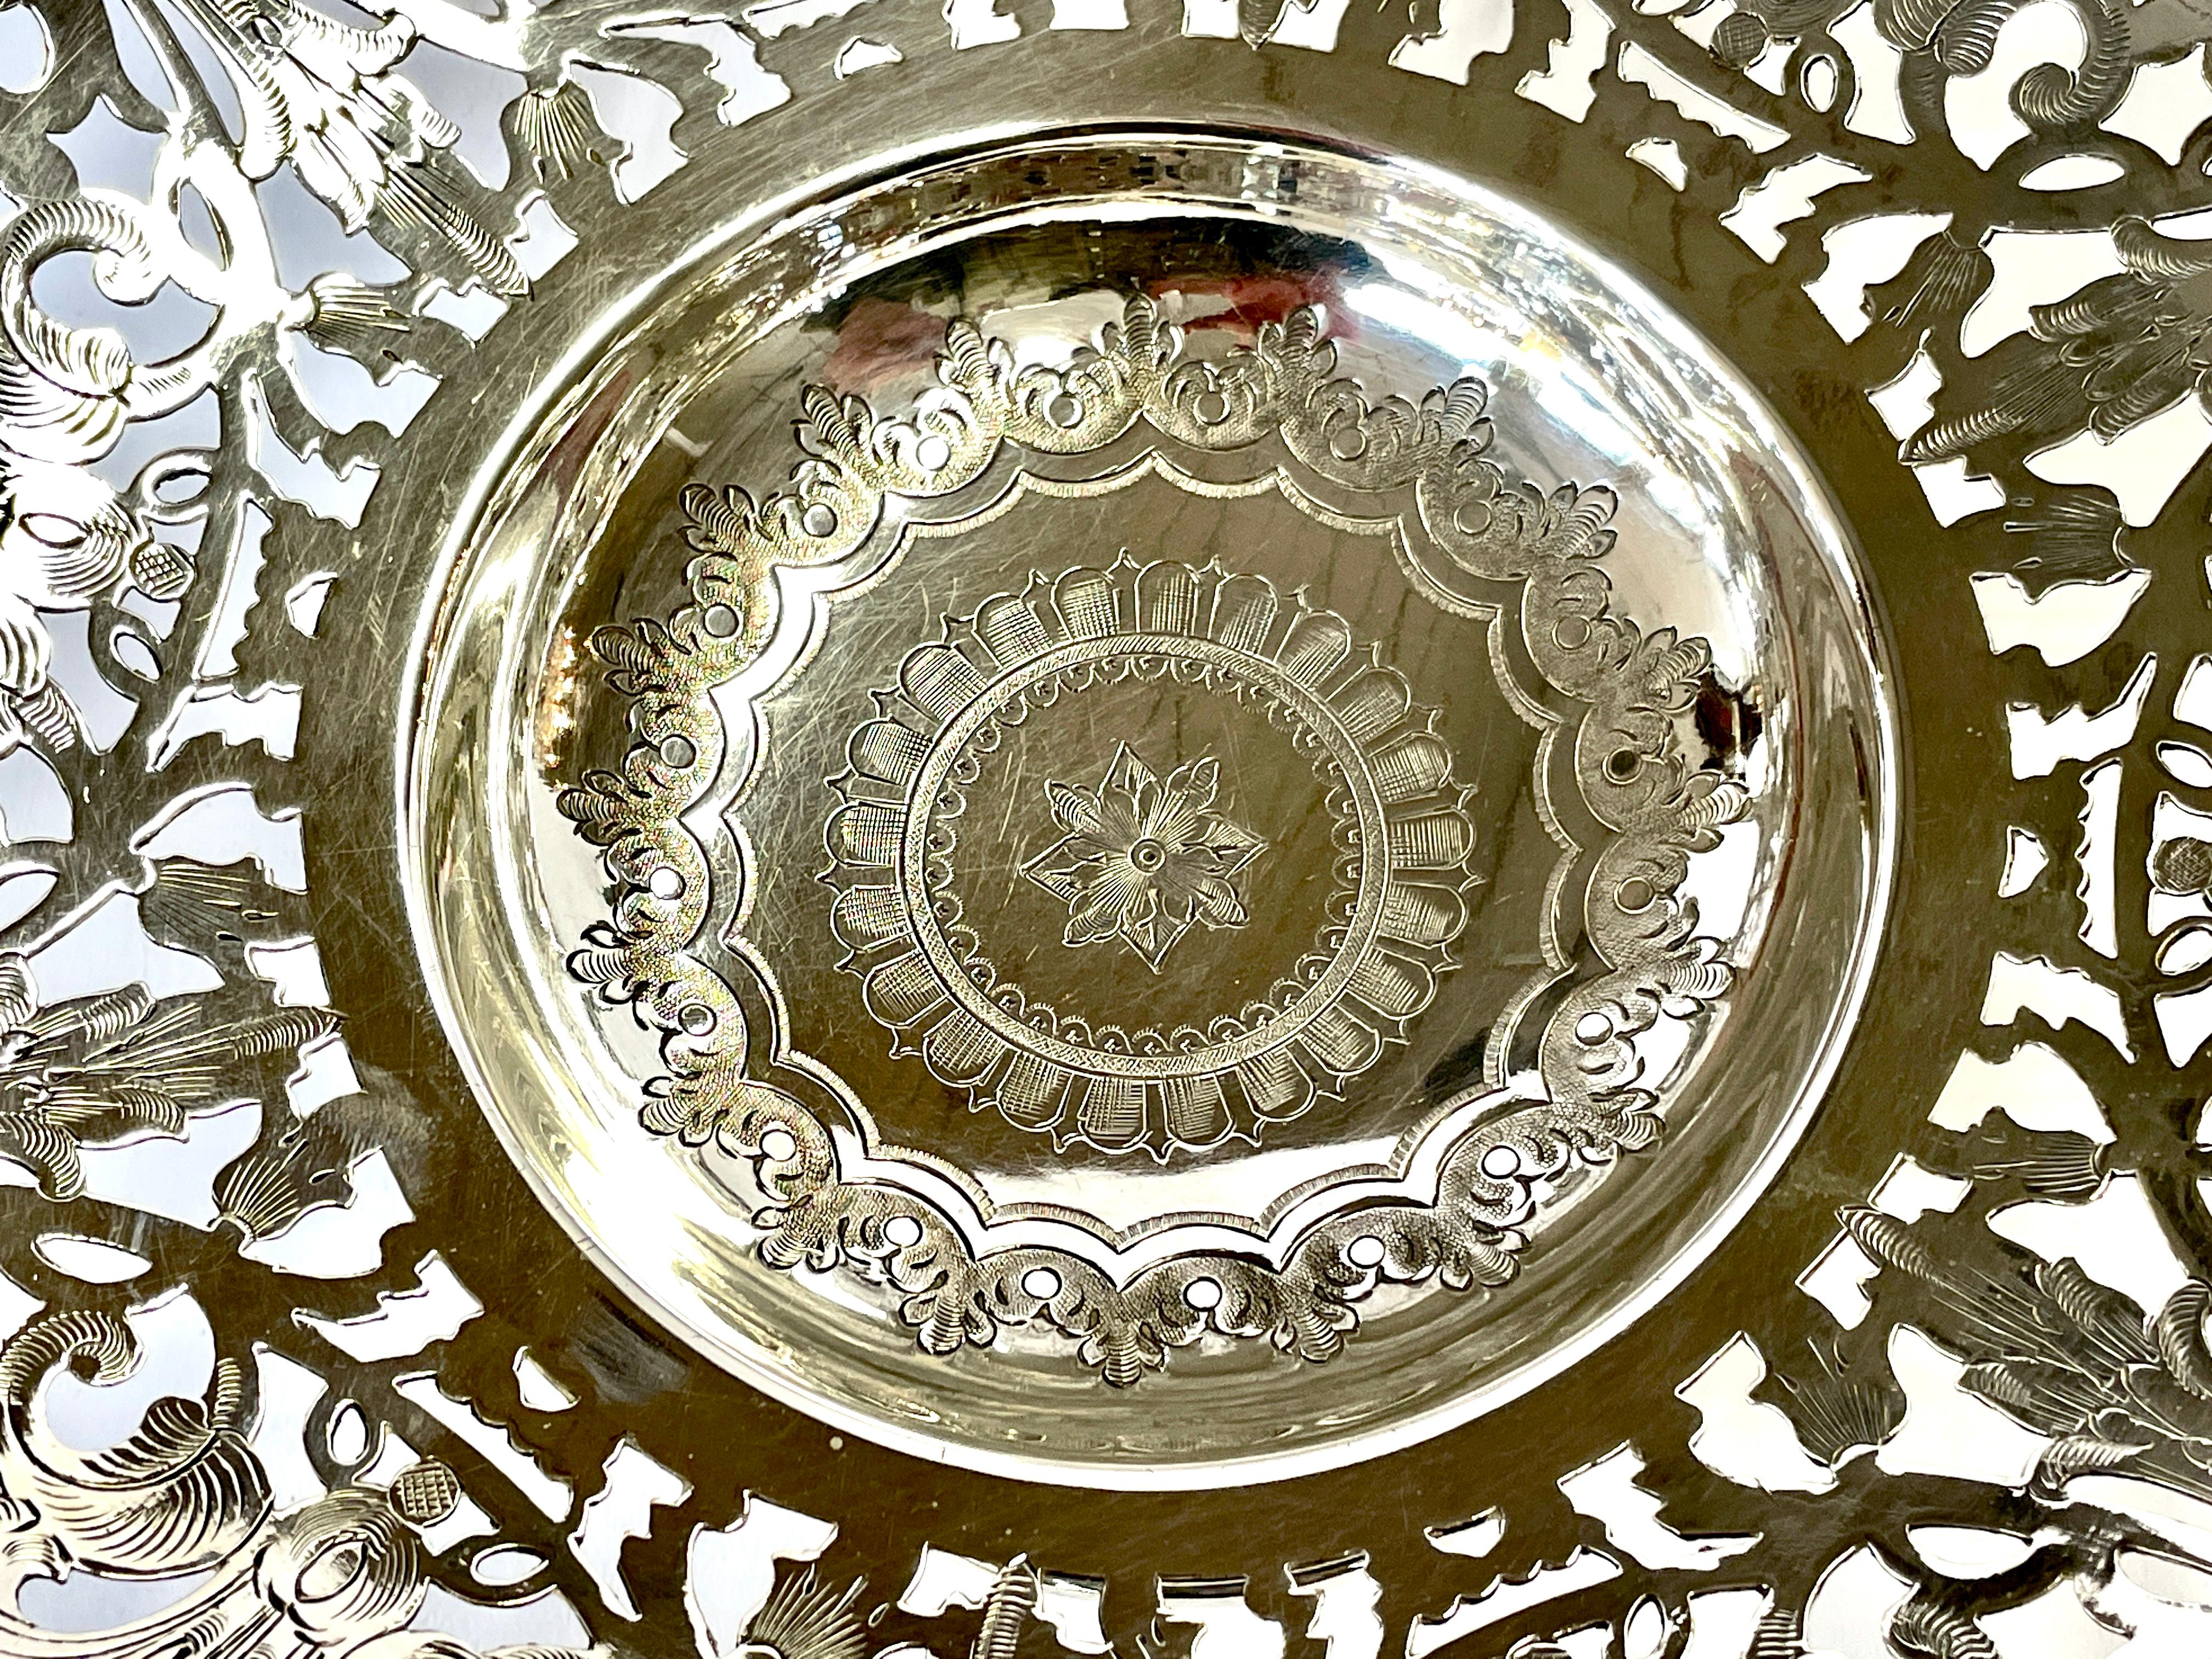 Hand-Crafted Fabulous Quality Hand Engraved and Hand Pierced Round Cake or Fruit Basket For Sale